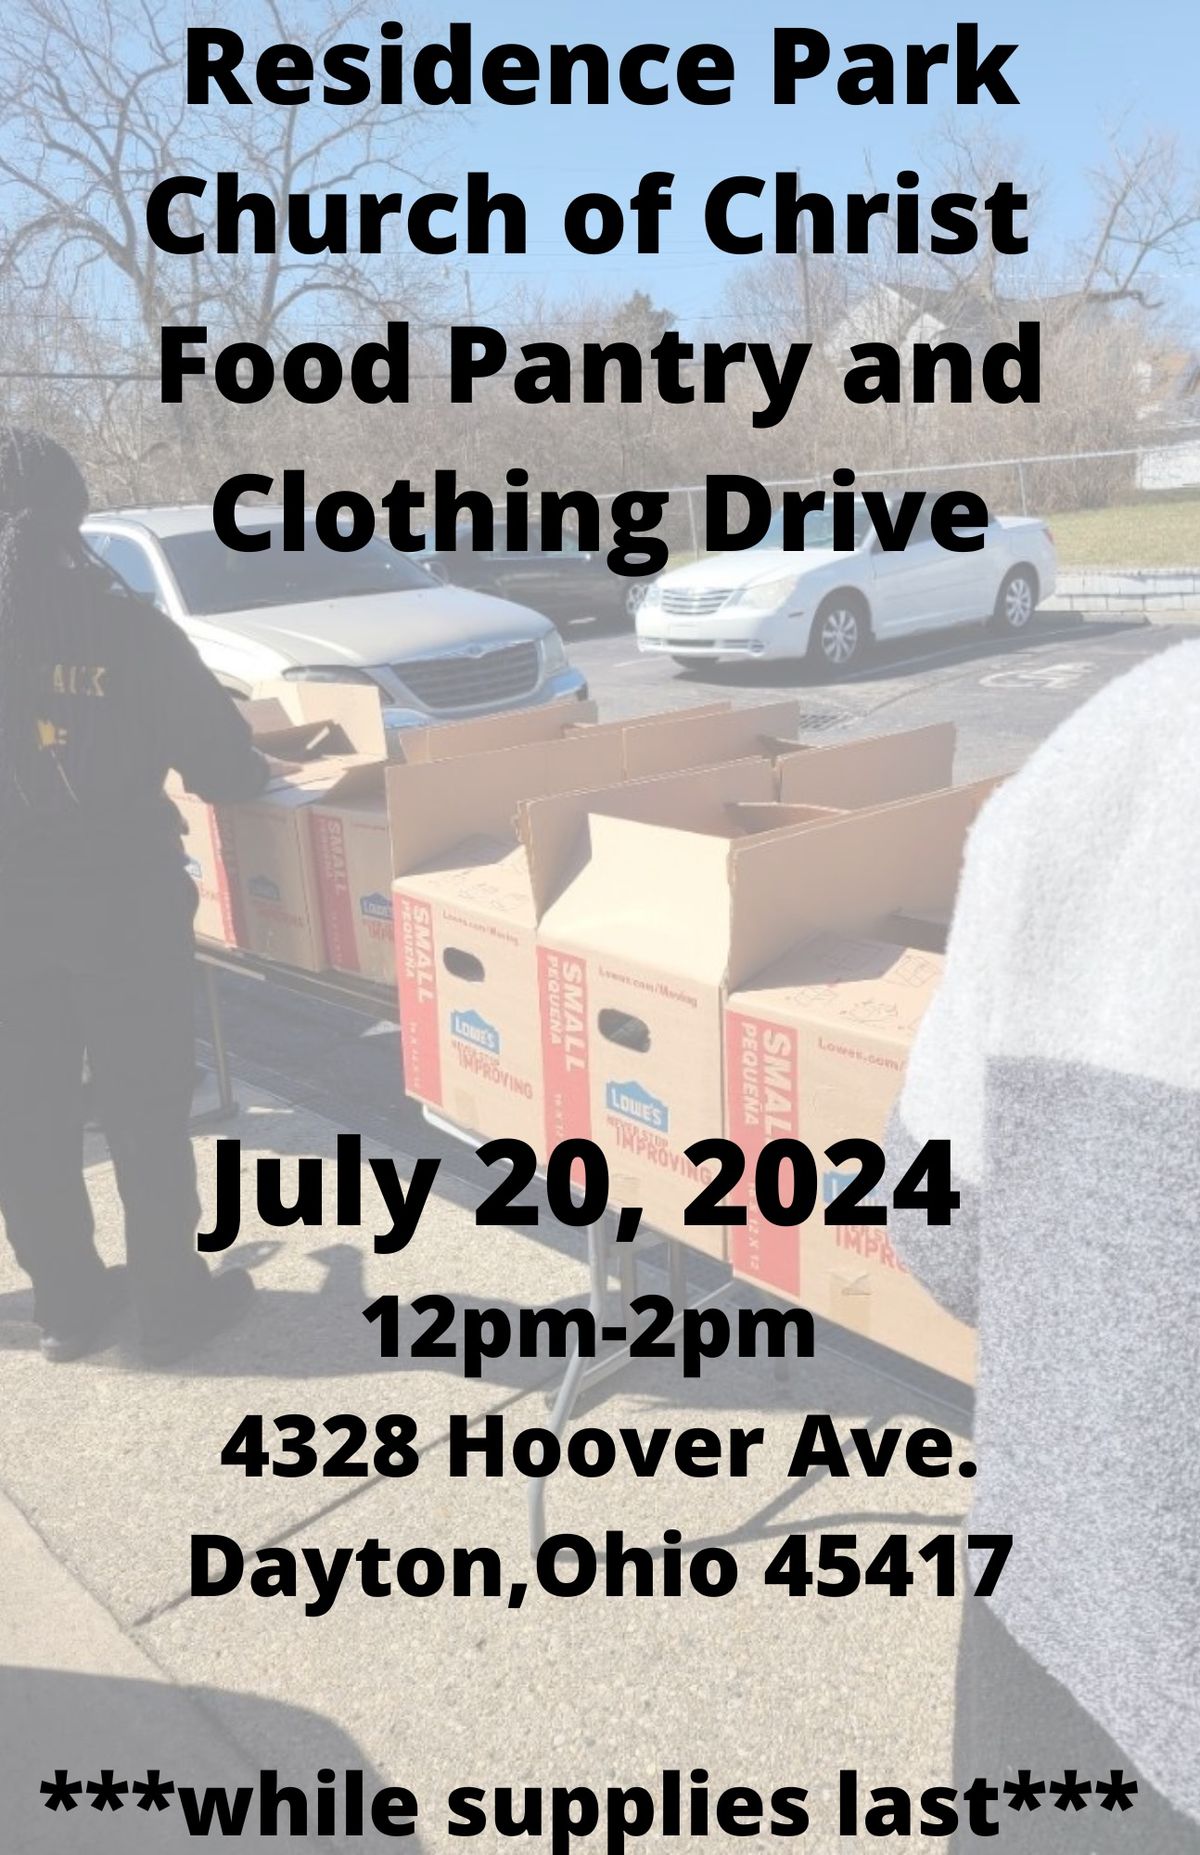 Food Pantry and Clothing Drive